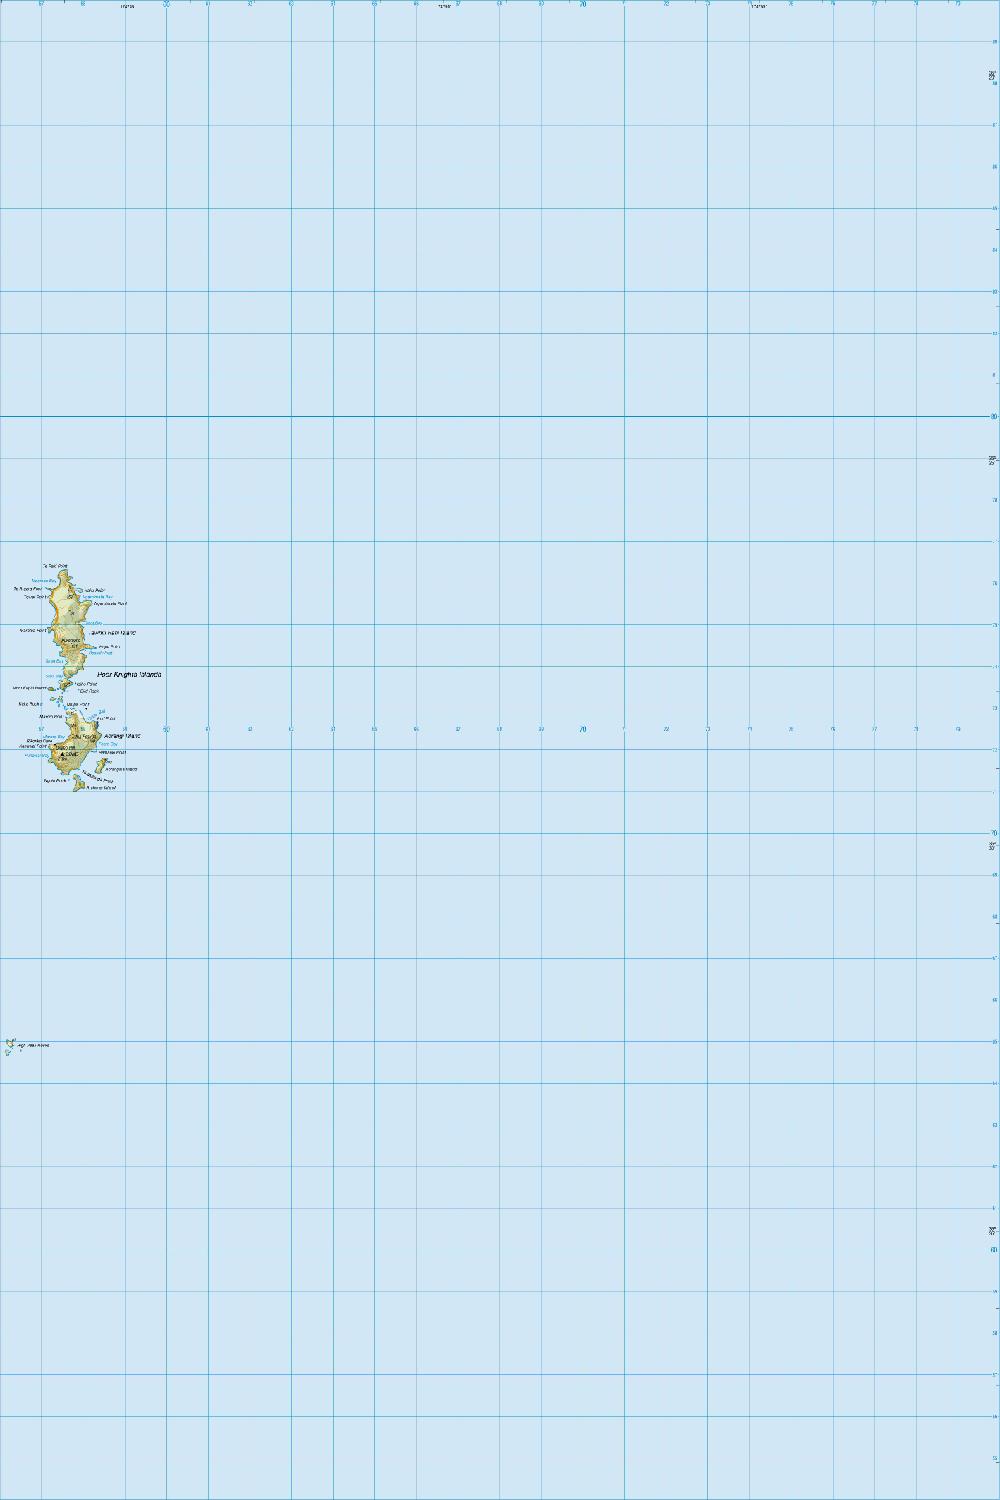 Topo map of Poor Knights Islands